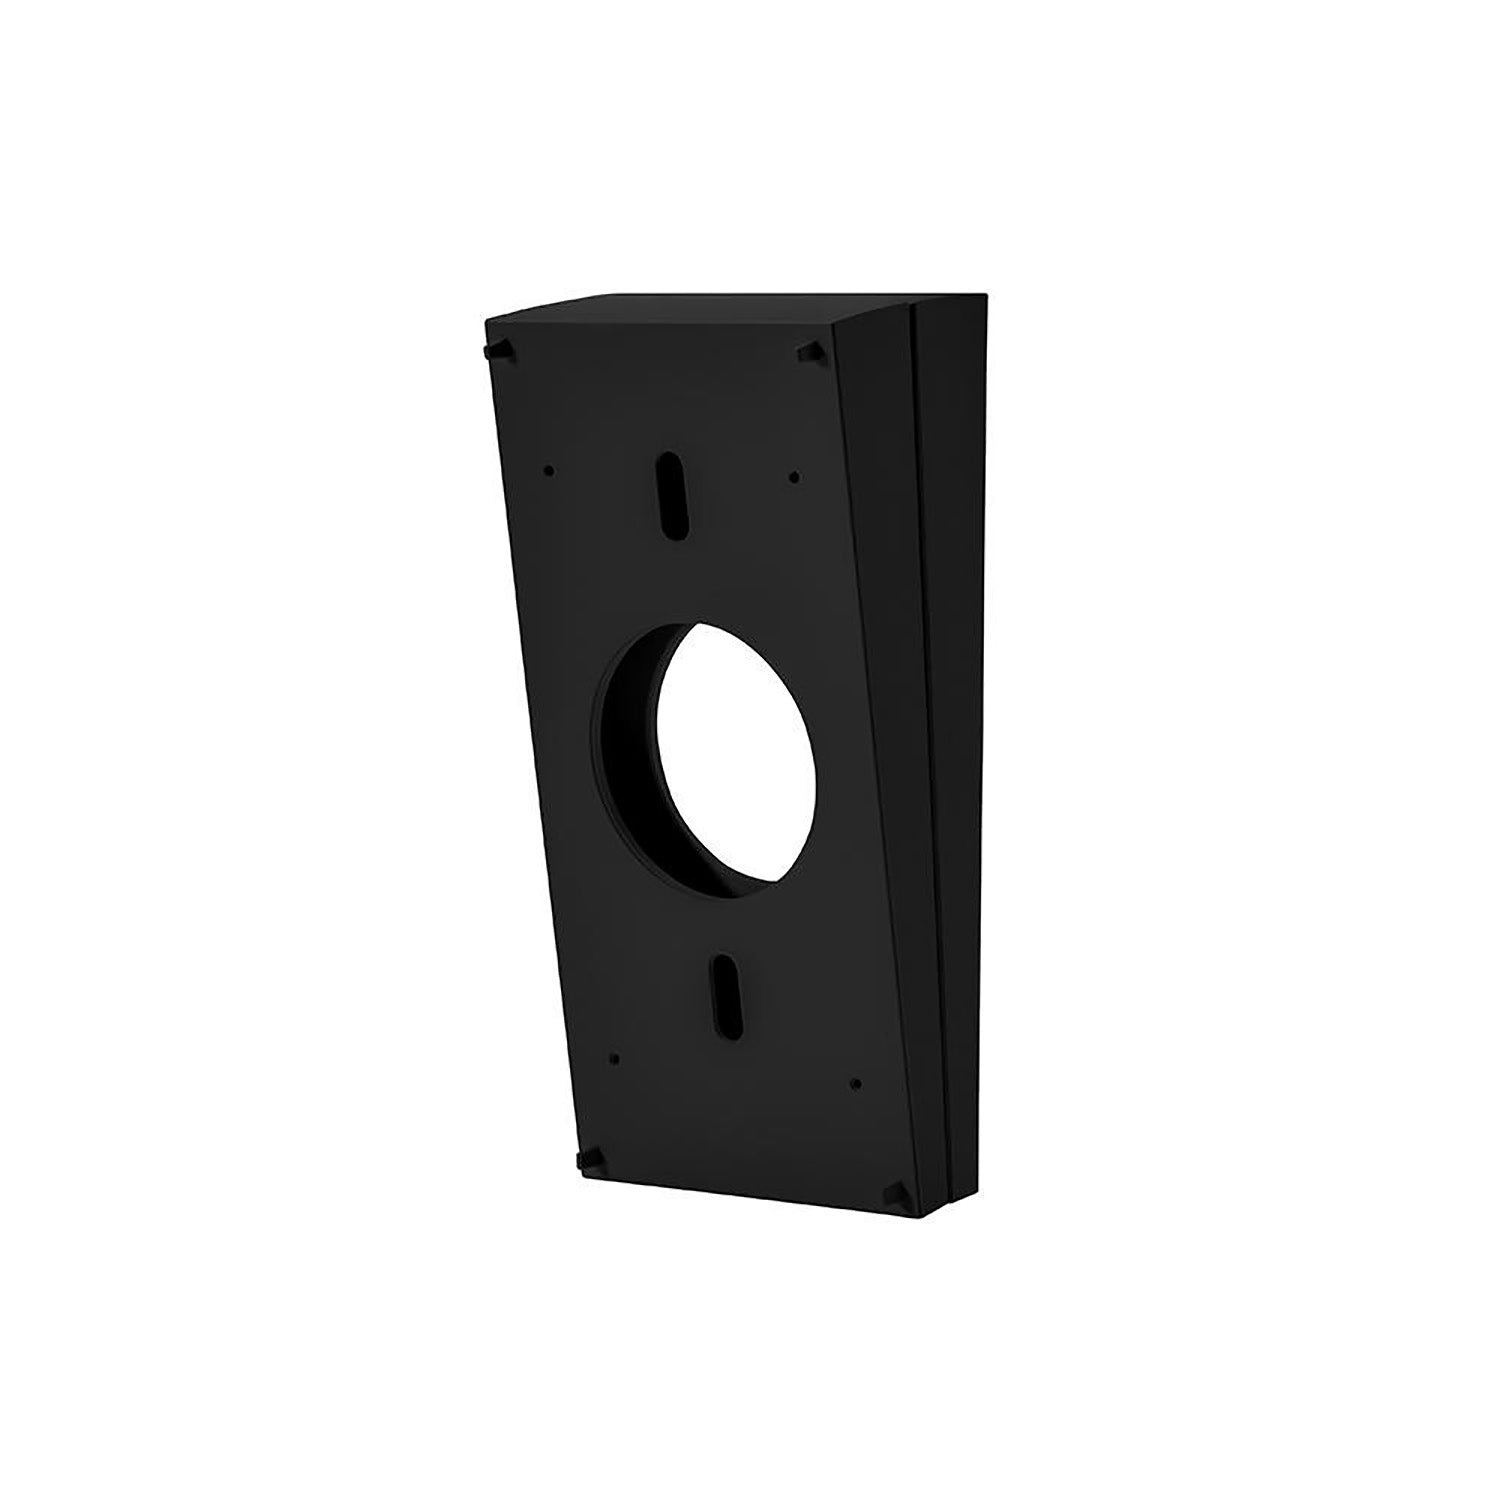 Wedge Kit (for Video Doorbell - 2nd Generation) - Wedge Kit (for Video Doorbell - 2nd Generation)